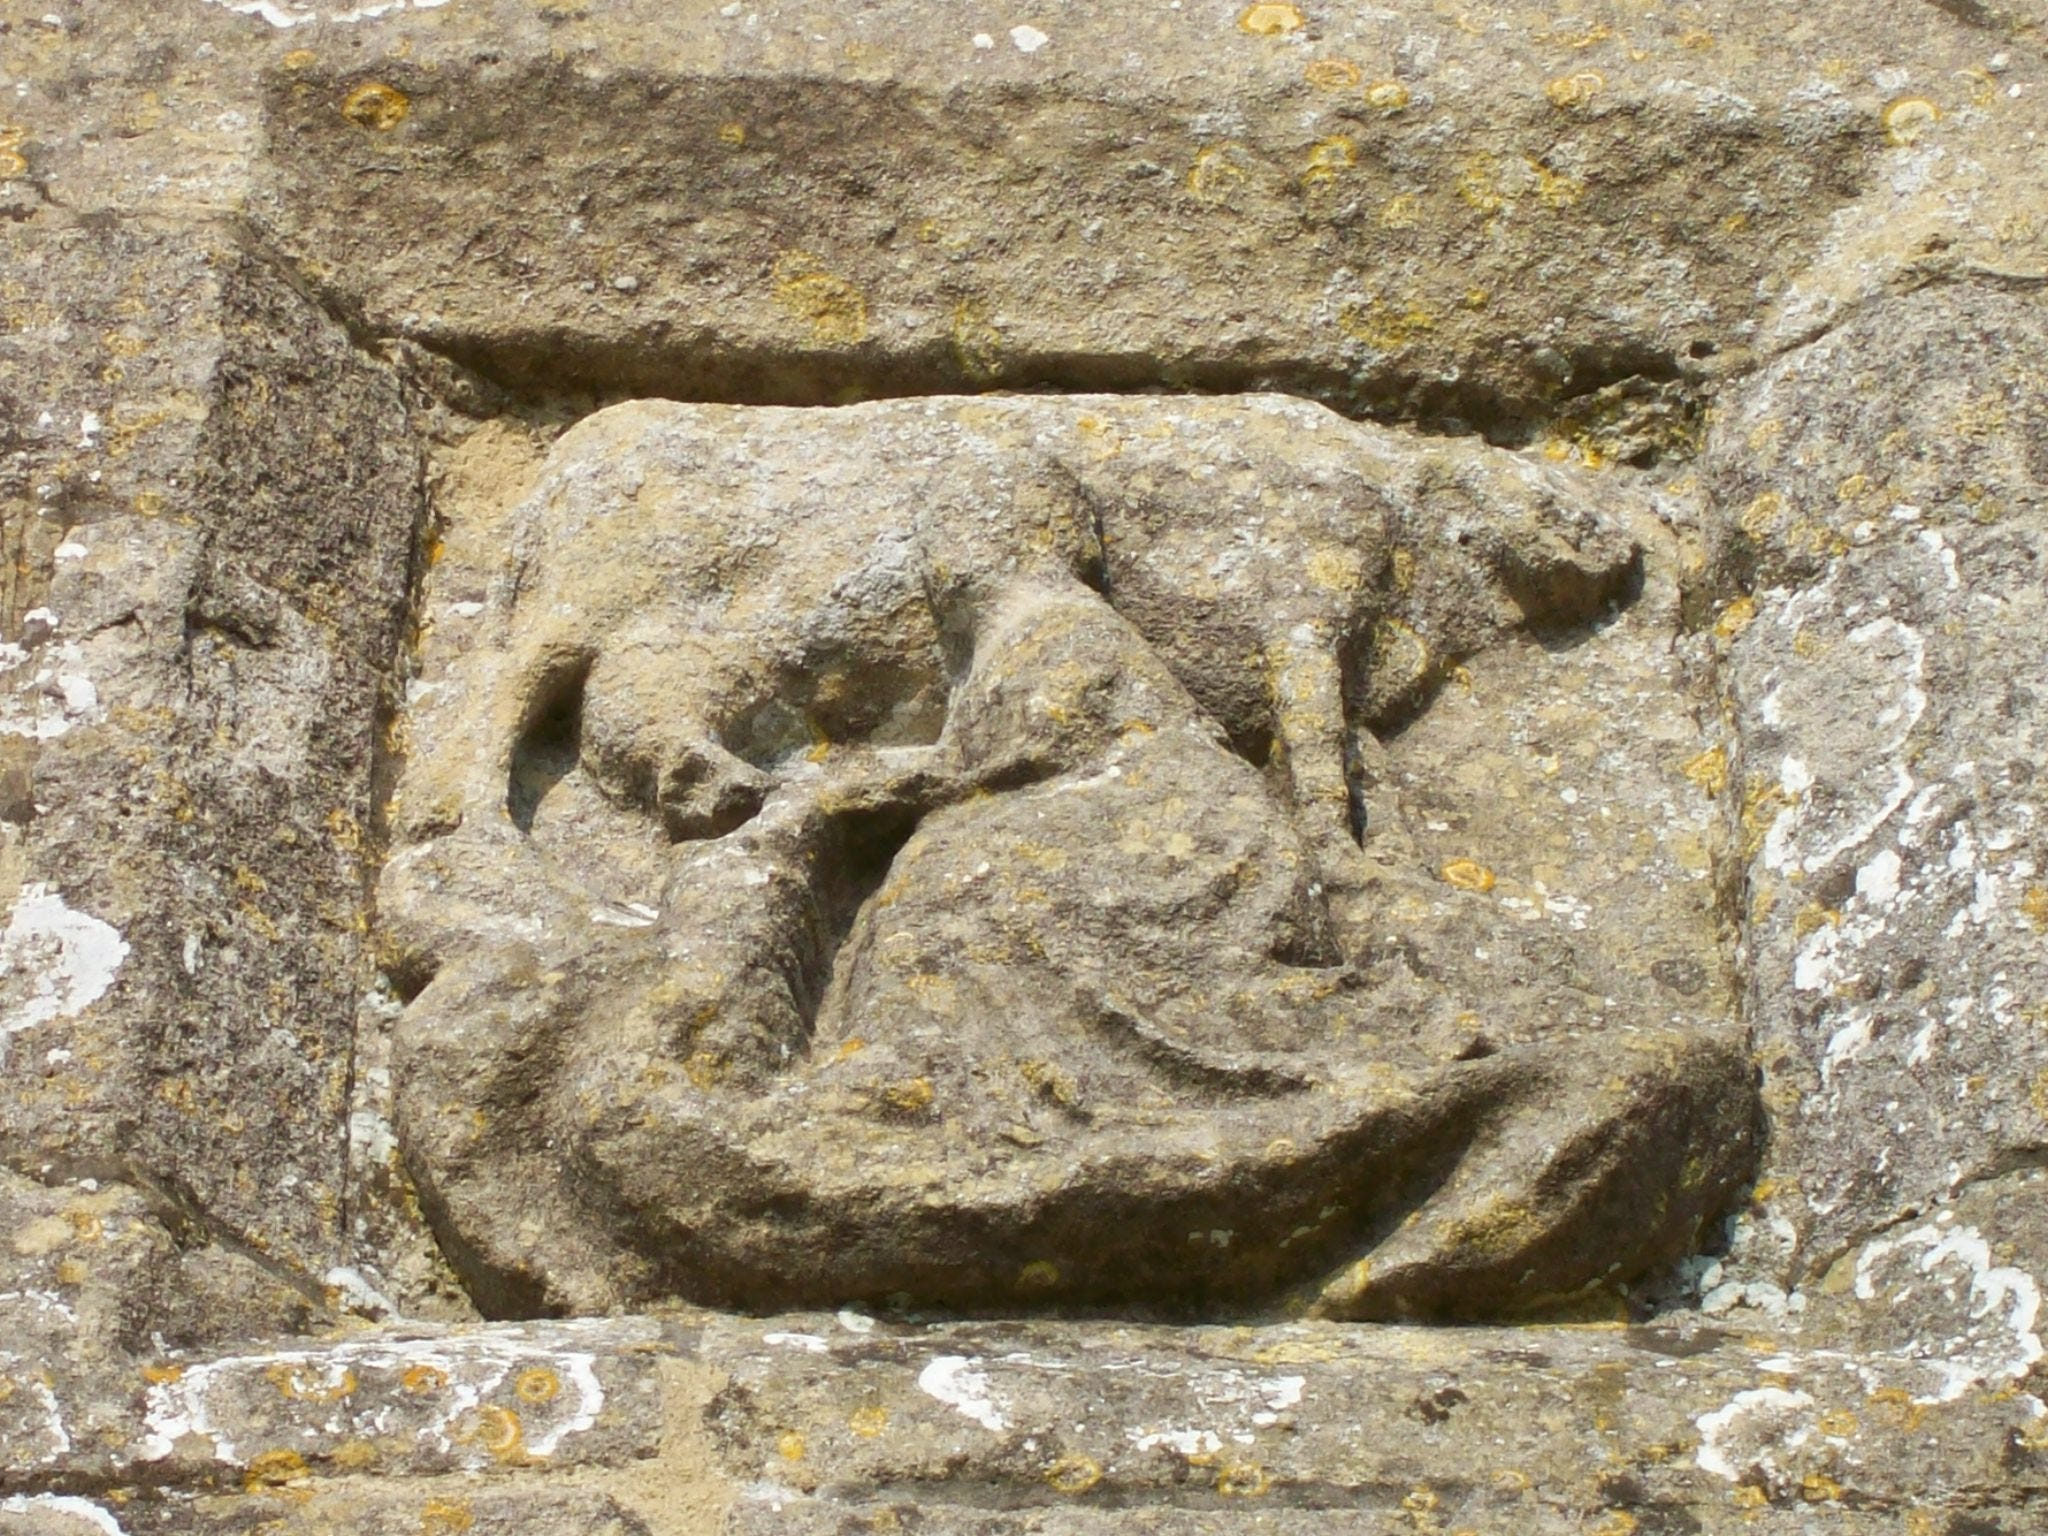 Carving of cow being milked by a woman in long skirt, the stone is sandy in colour and spotted with patches of green and white lichen.